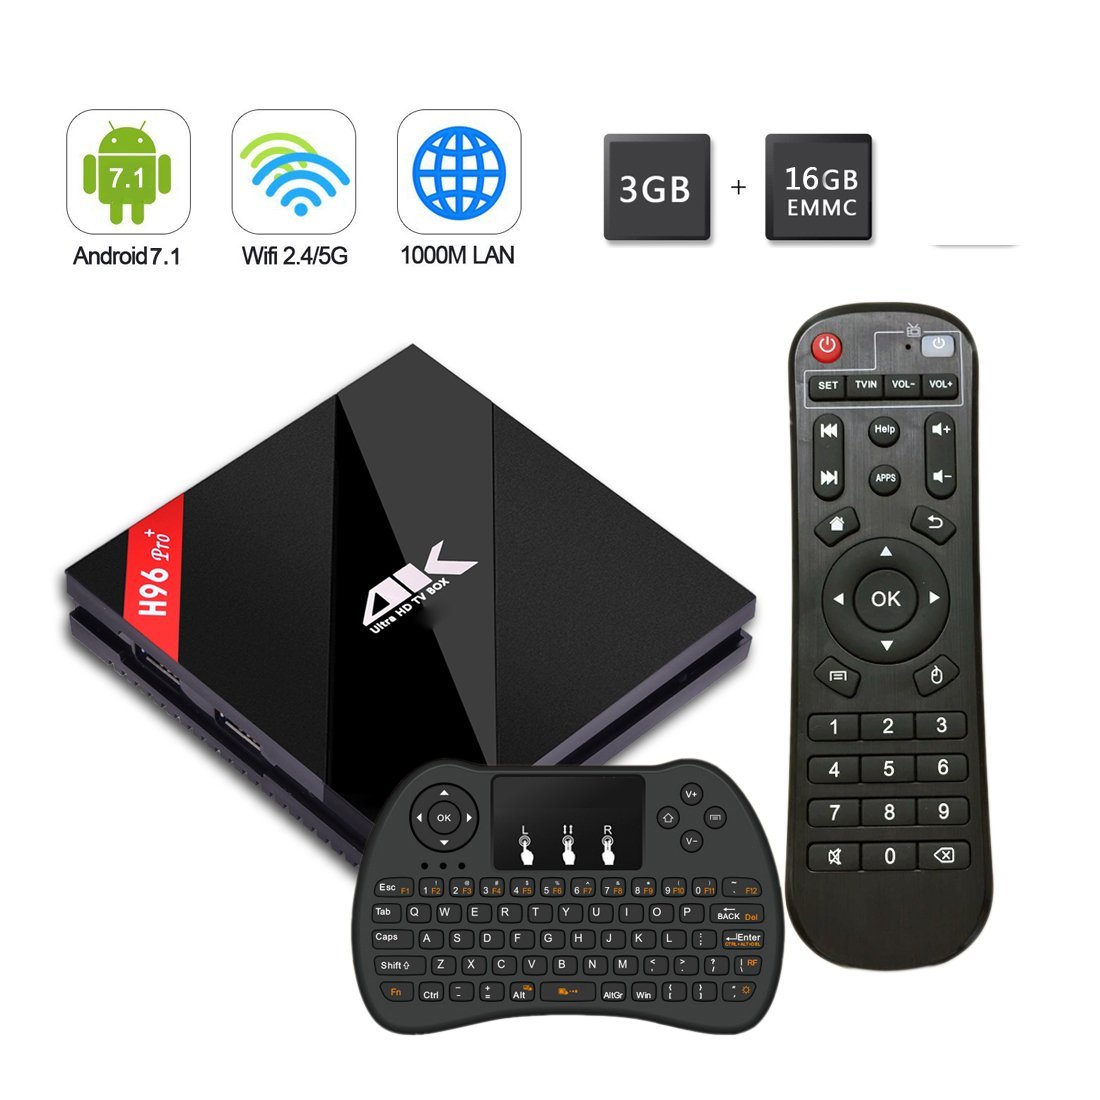 AndroidTV.ie